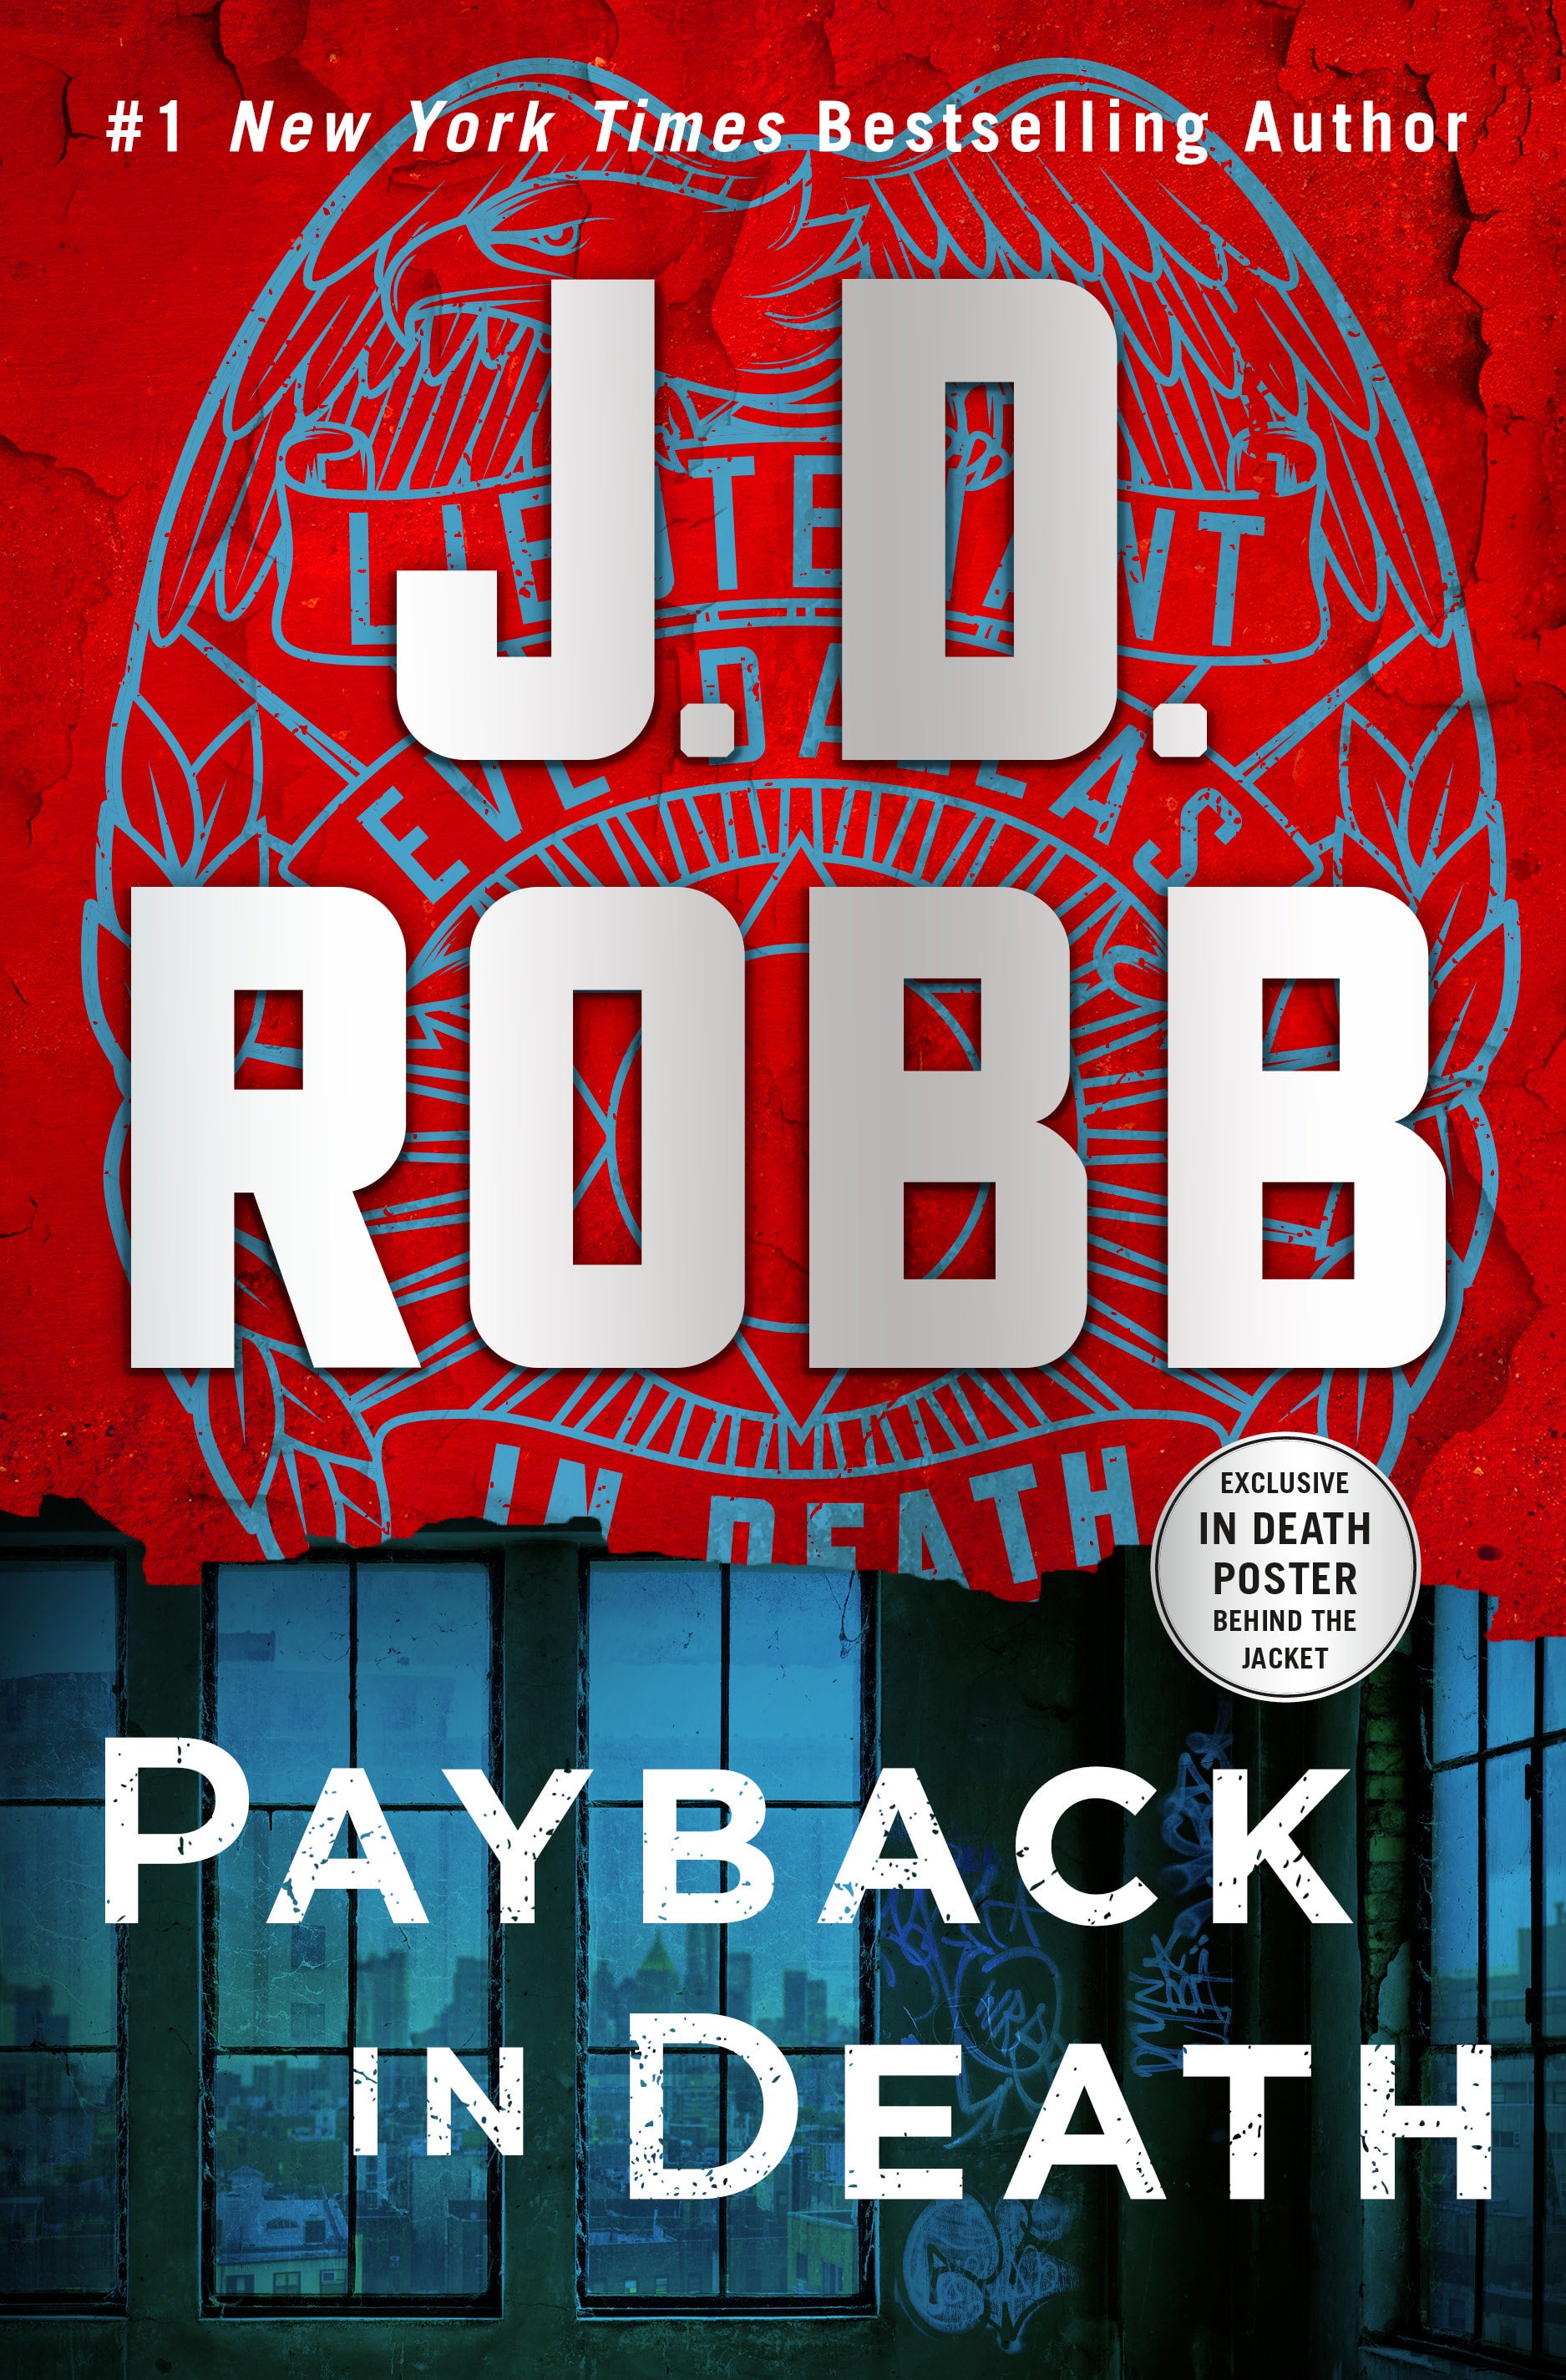 PAYBACK IN DEATH 57 HC by J.D. Robb TURN THE PAGE BOOKSTORE